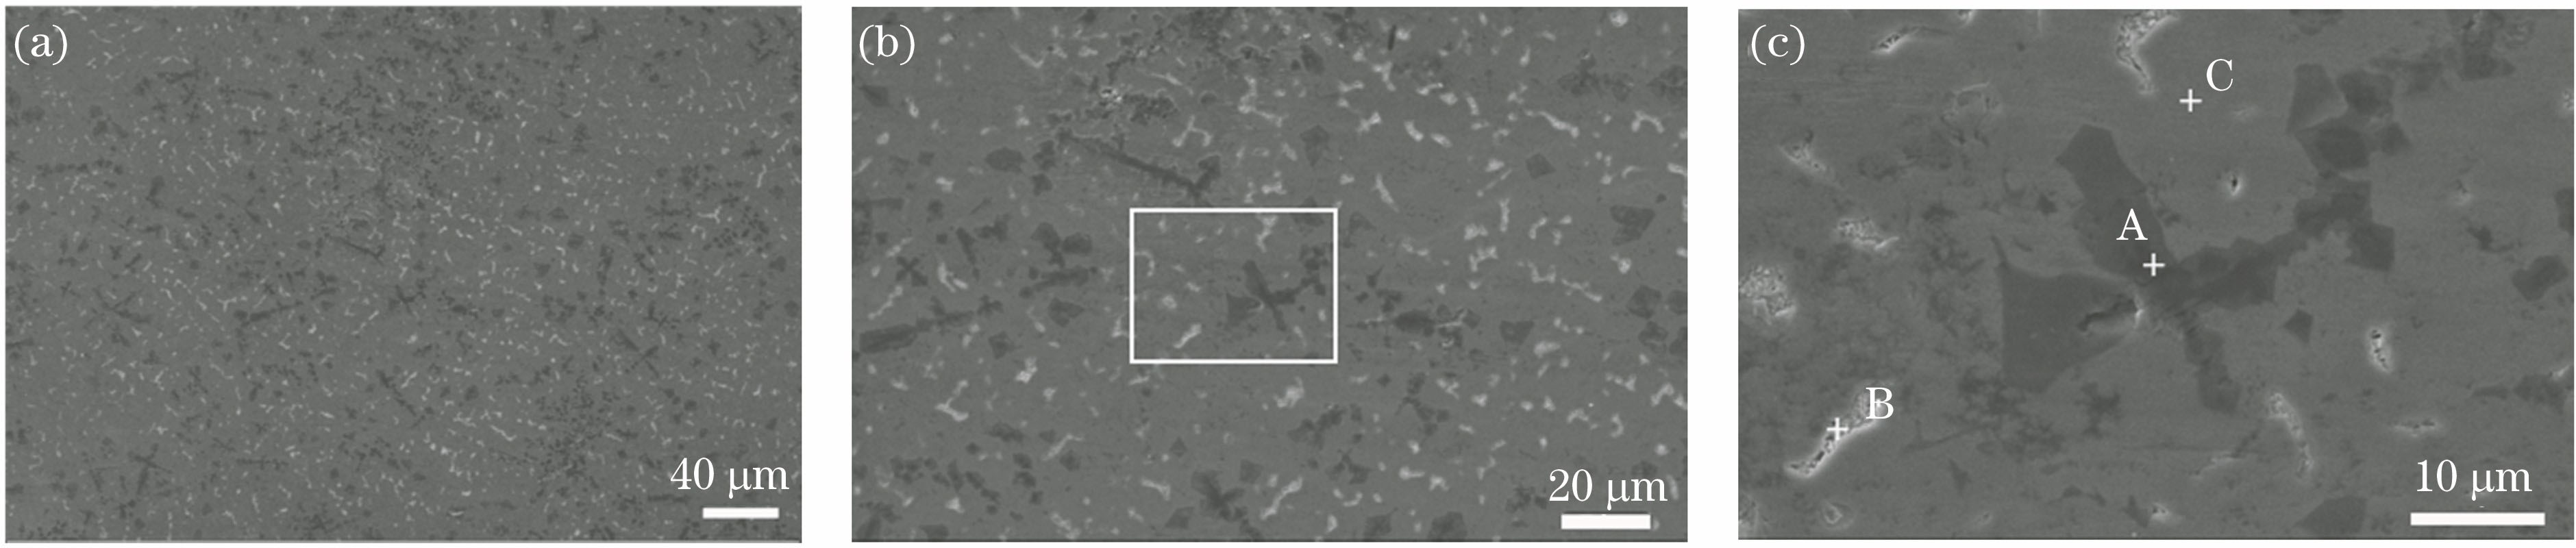 SEM images of typical microstructure of laser-melting-deposited composite. (a) SEM image with low magnification; (b) SEM image with high magnification; (c) local-magnified SEM image